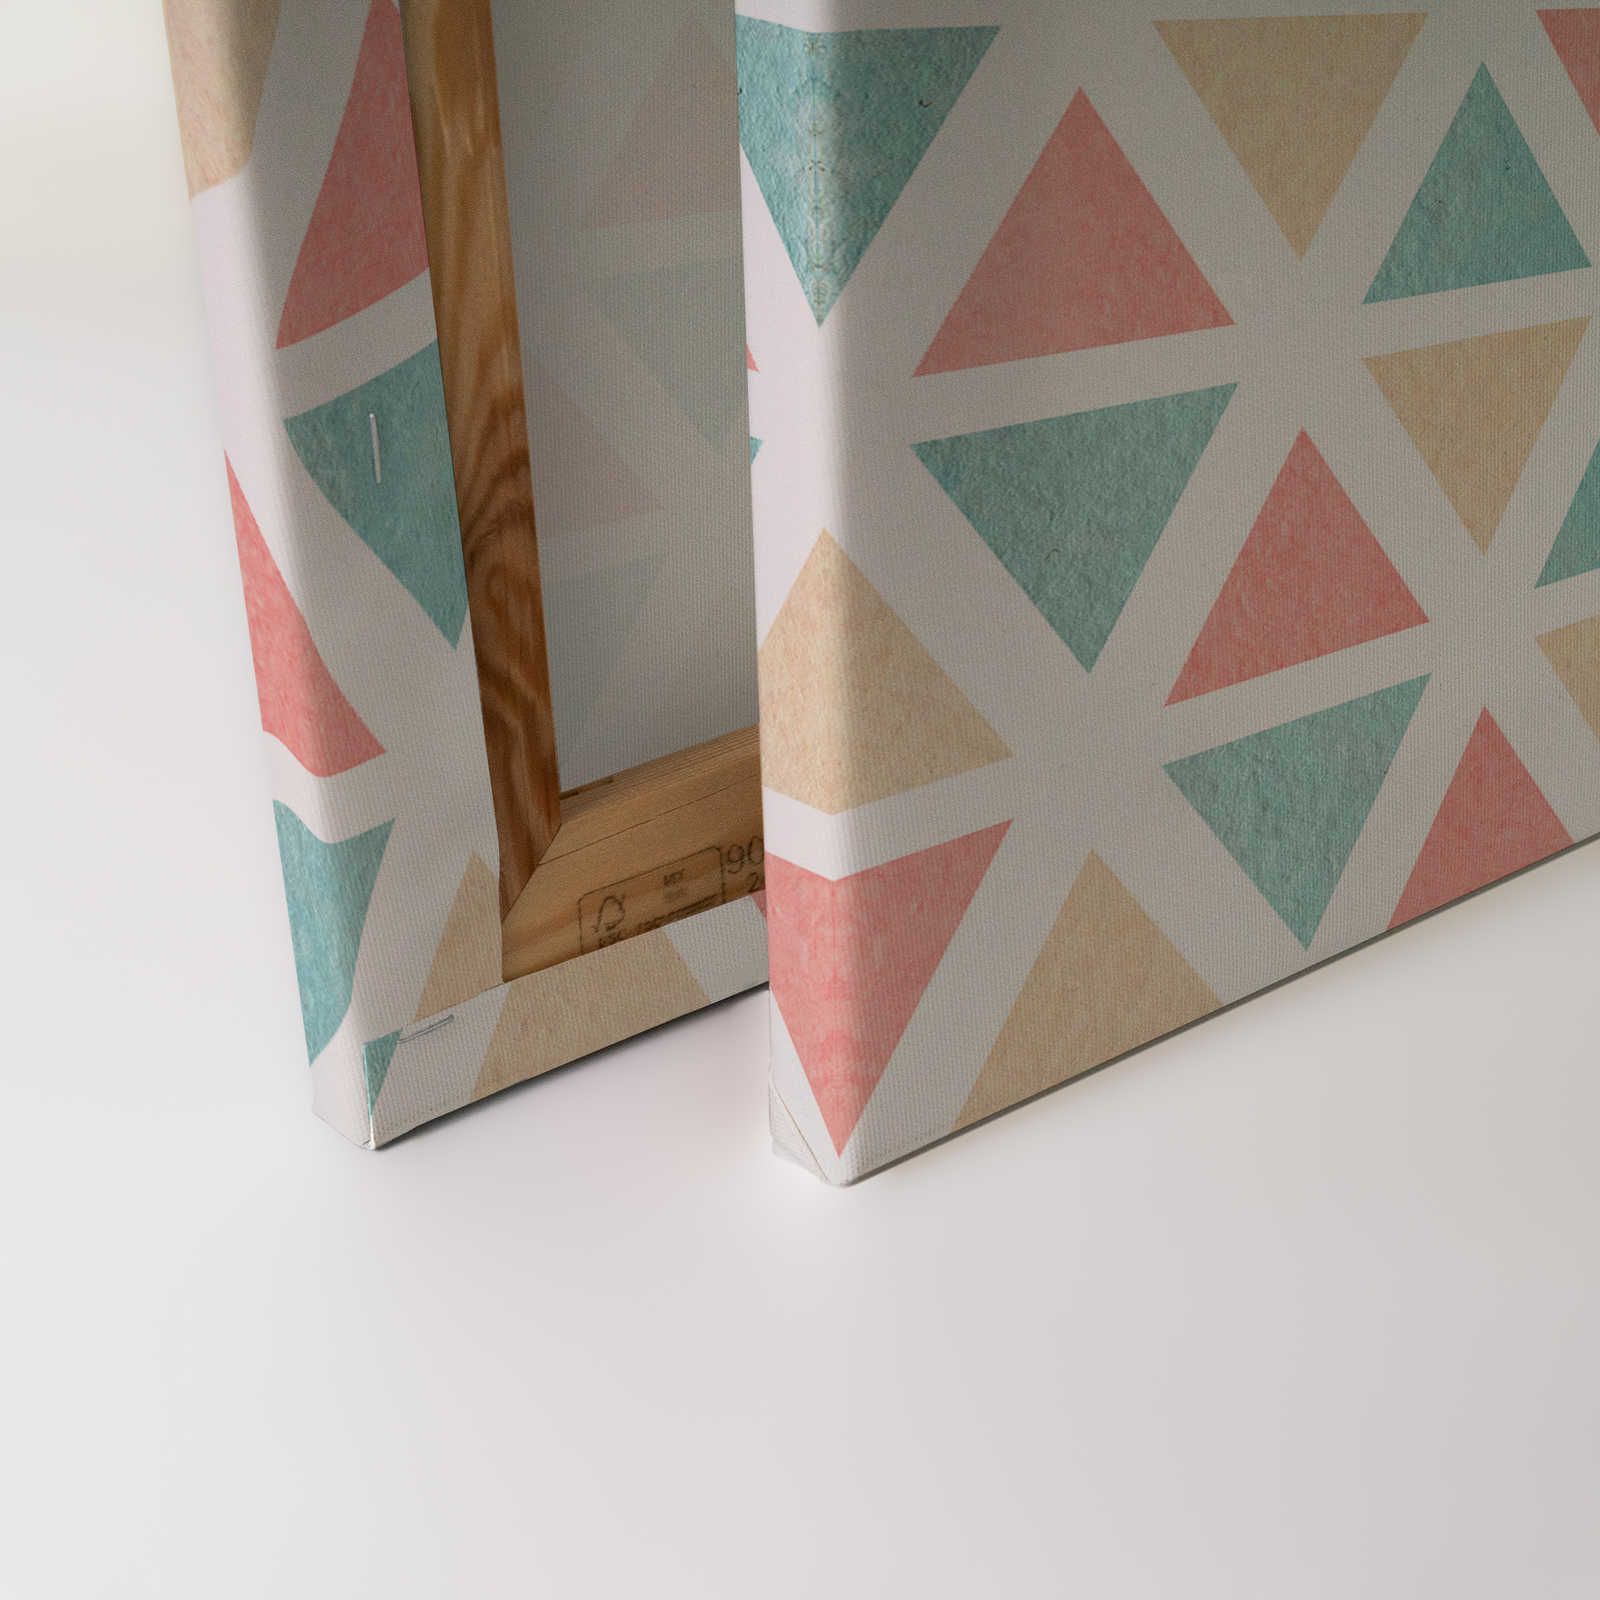             Canvas graphic pattern with colourful triangles - 90 cm x 60 cm
        